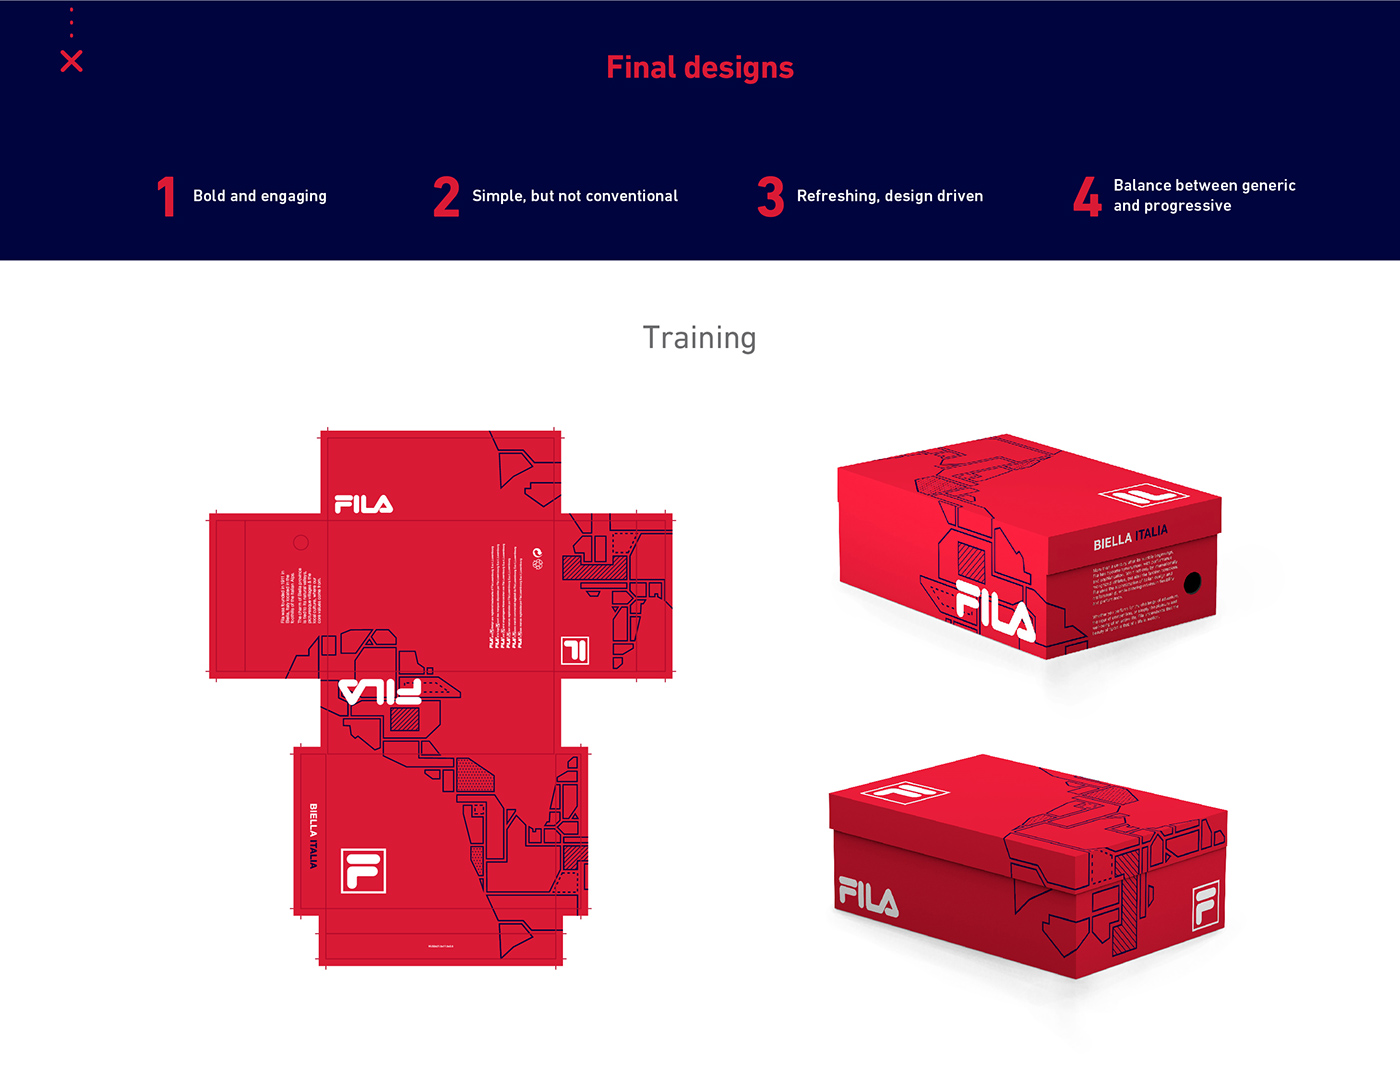 fila sports lifestyle training footwear Packaging Italy India box